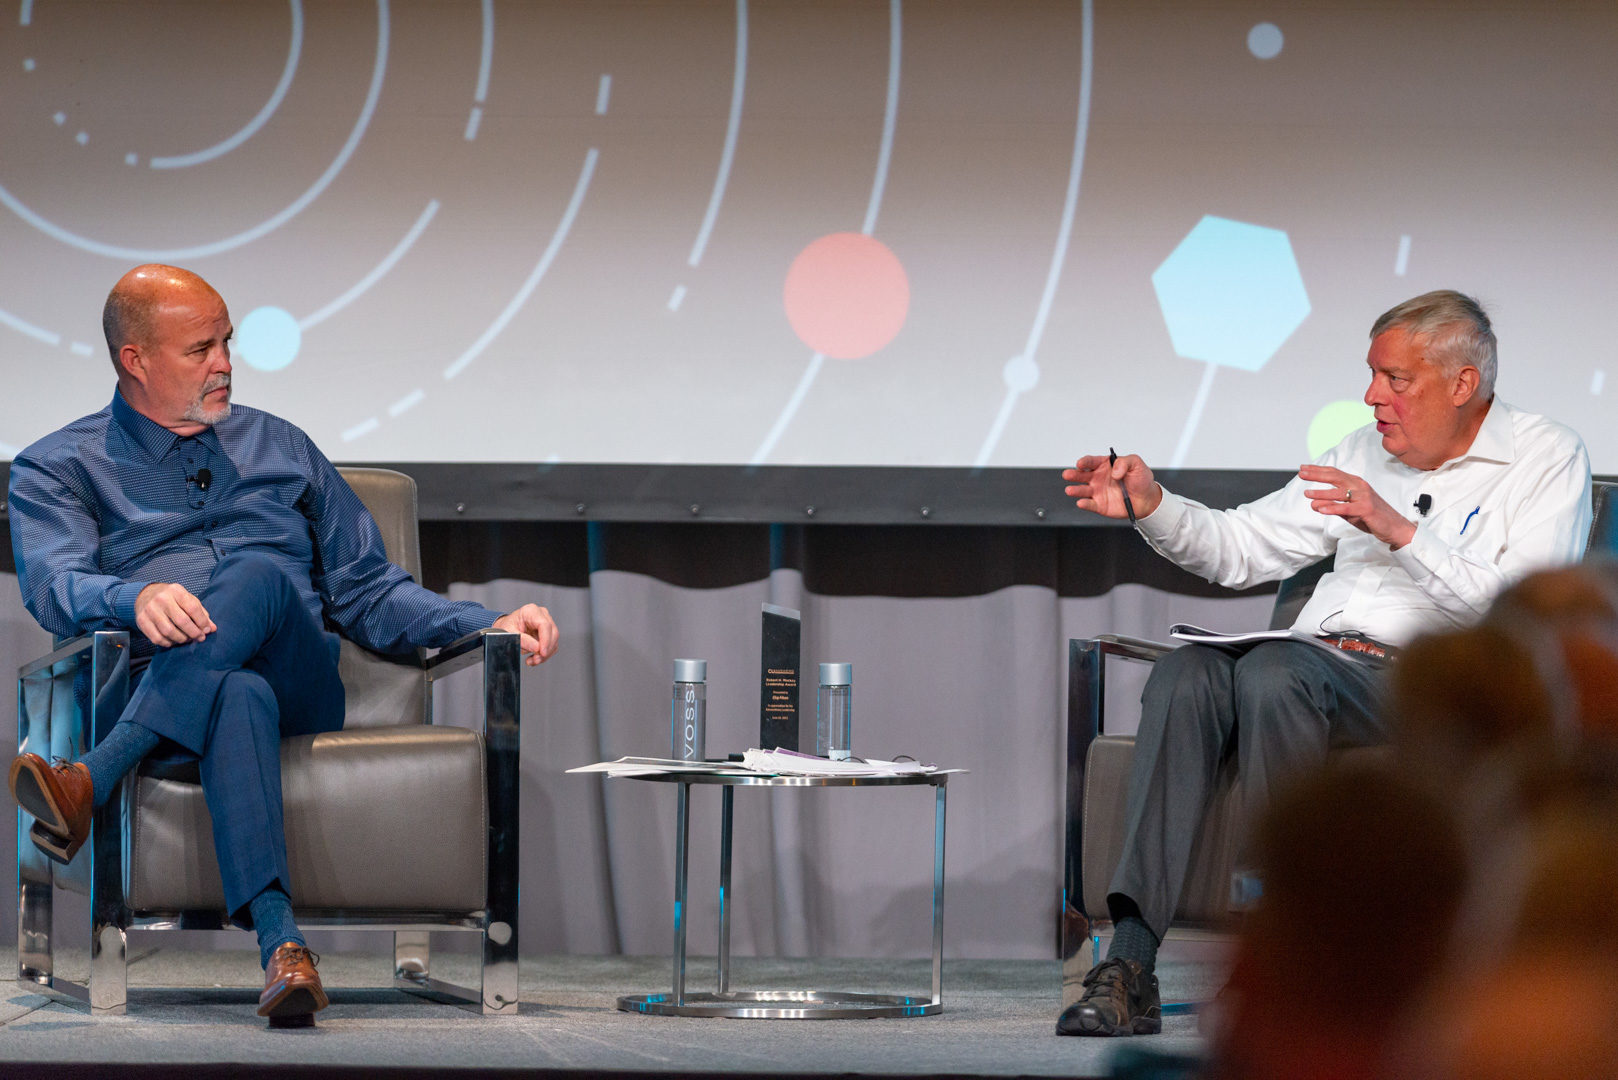 CU*Answers CEO Randy Karnes and long-time industry icon Chip Filson sit down to discuss the question, "can we be transformative pioneers for our futures?"